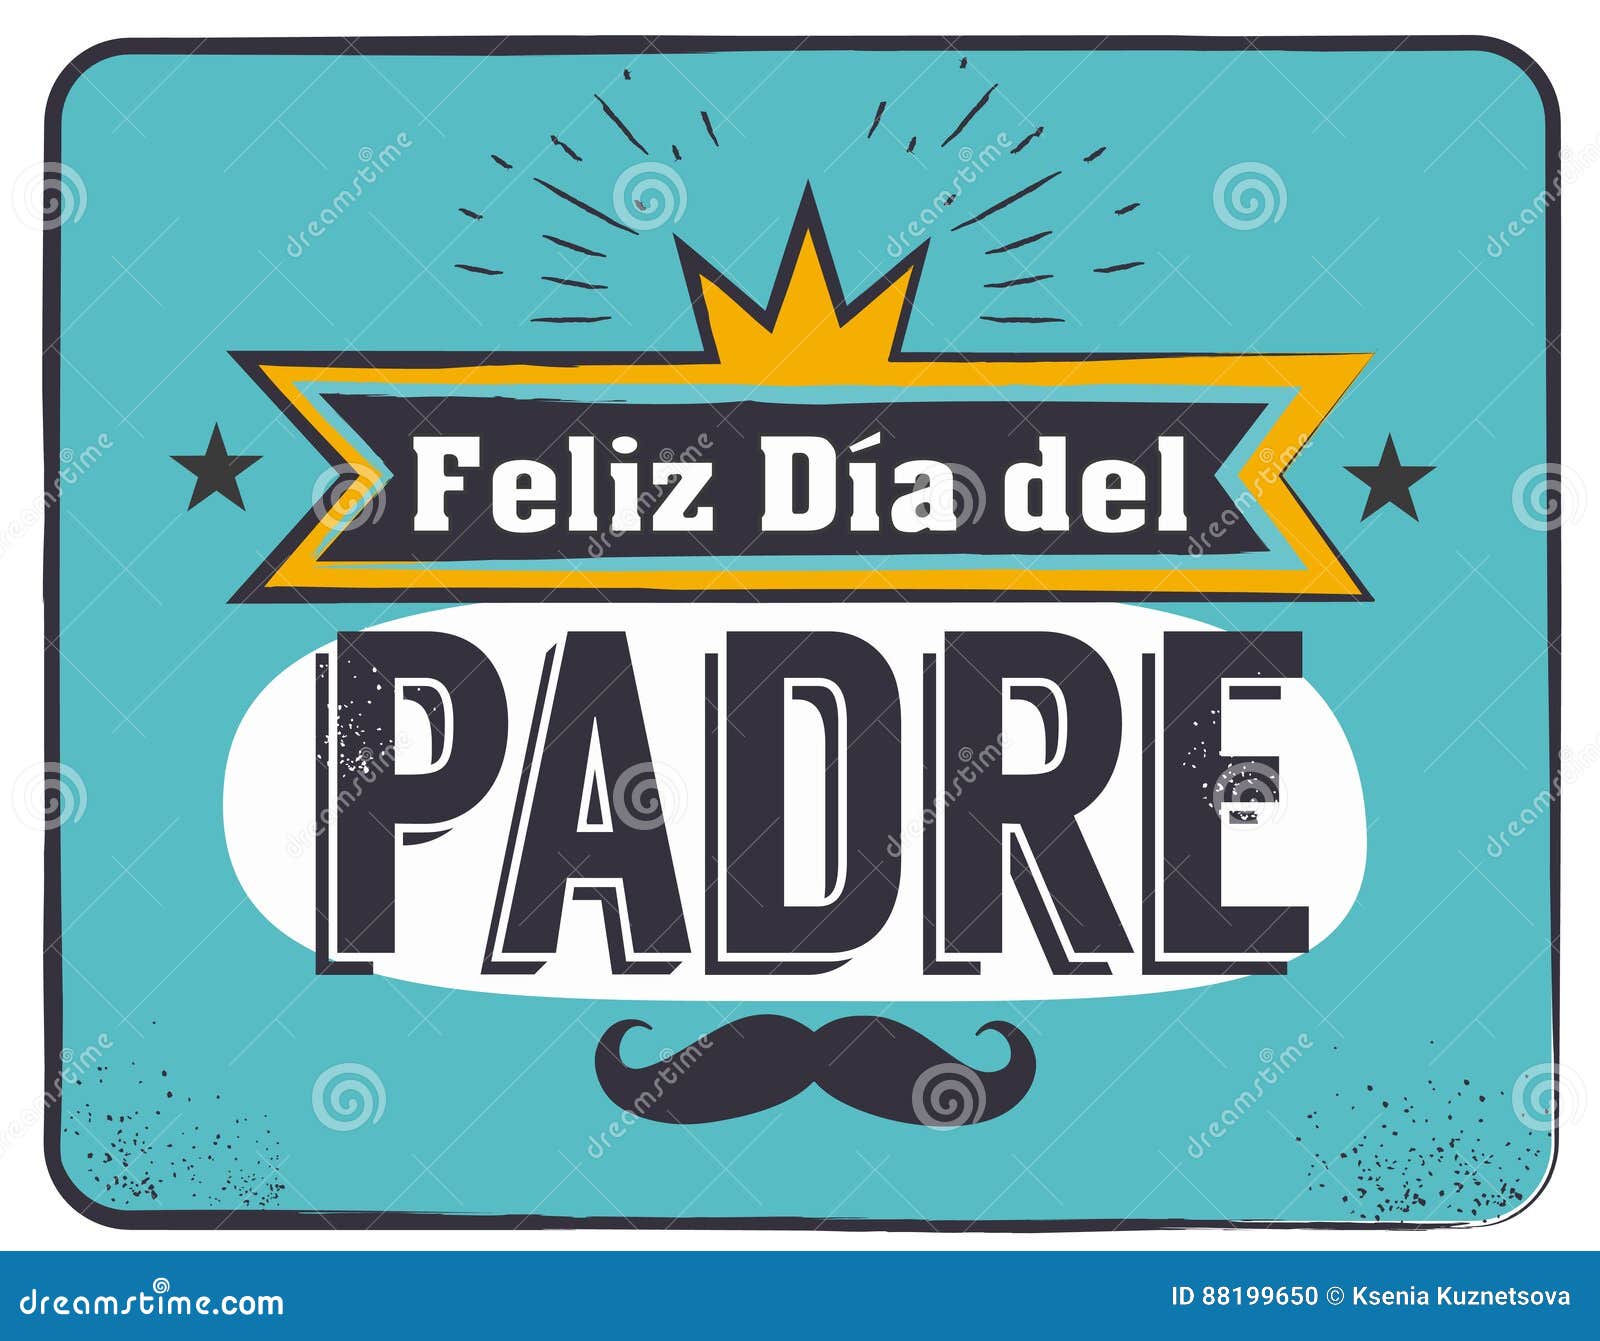 the best dad in the world - world s best dad - spanish language. happy fathers day - feliz dia del padre - quotes